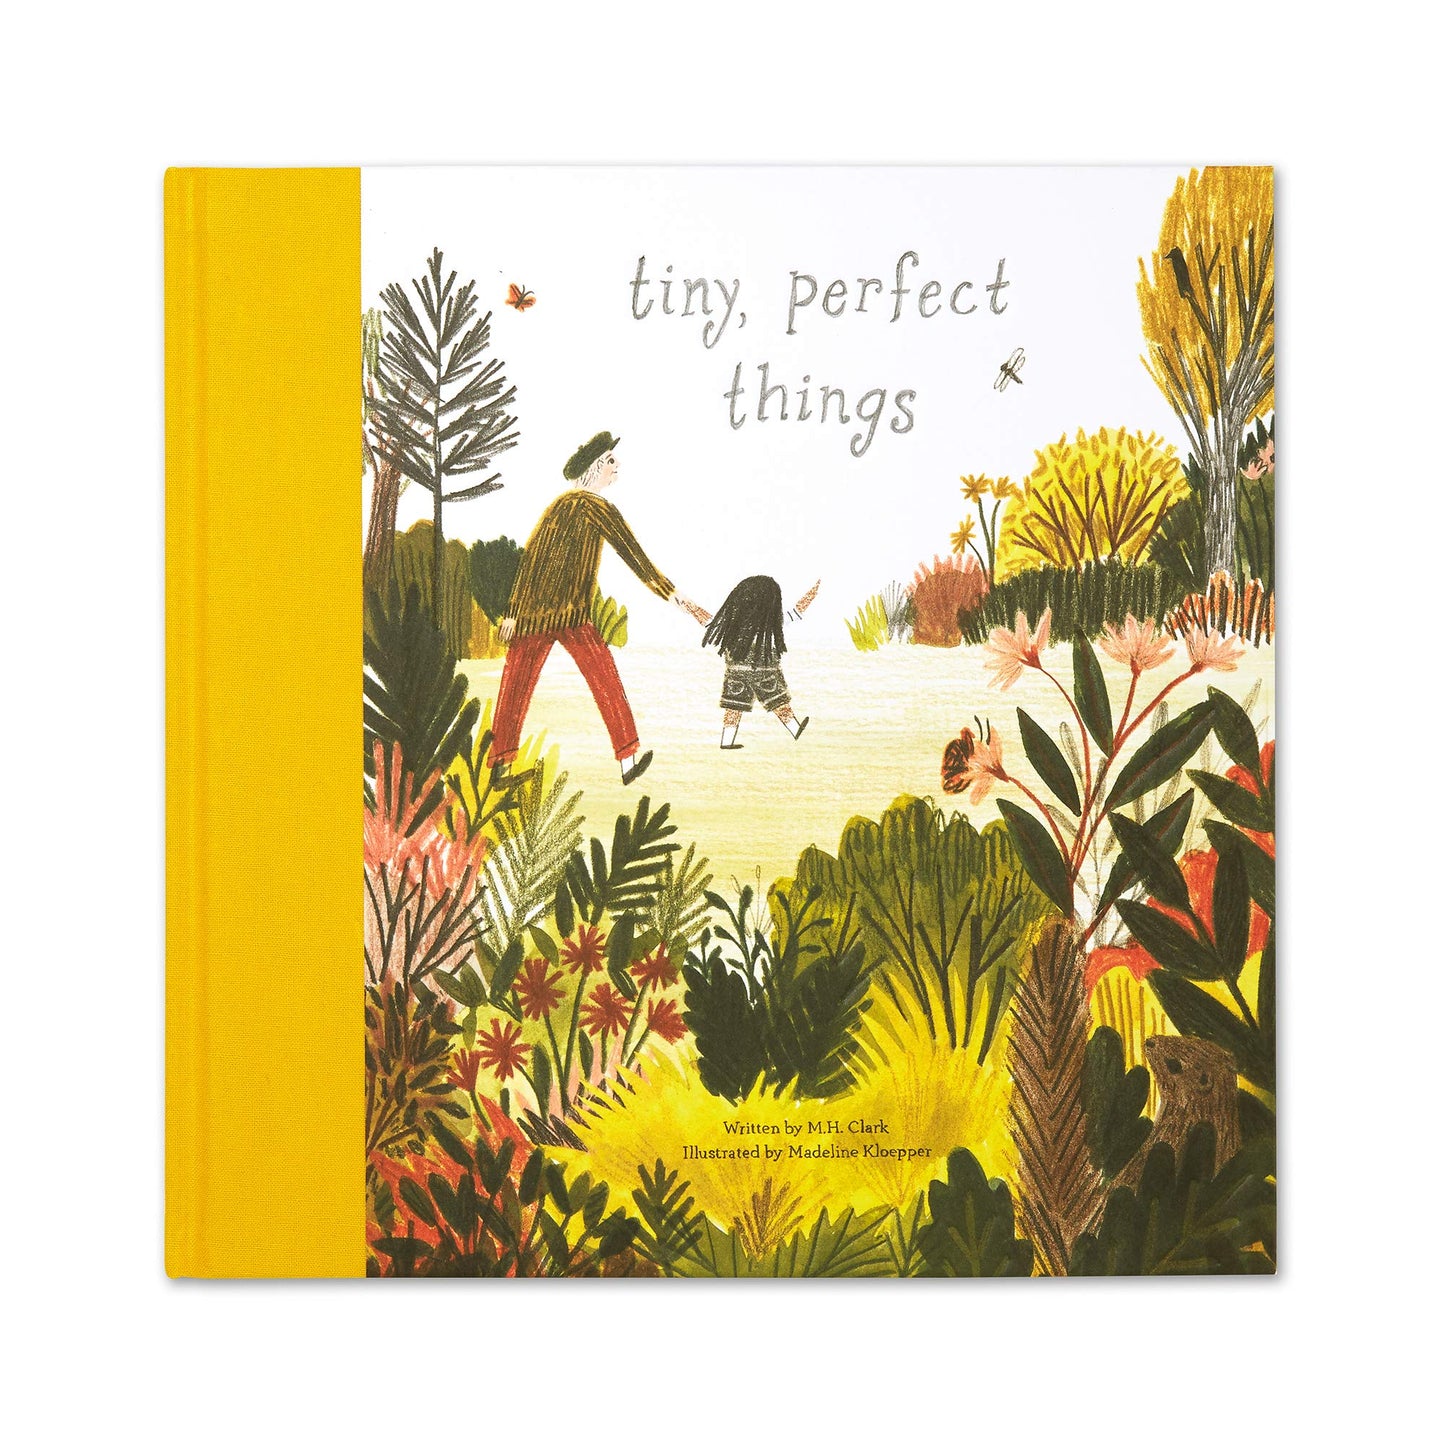 Tiny Perfect Things by MH Clark